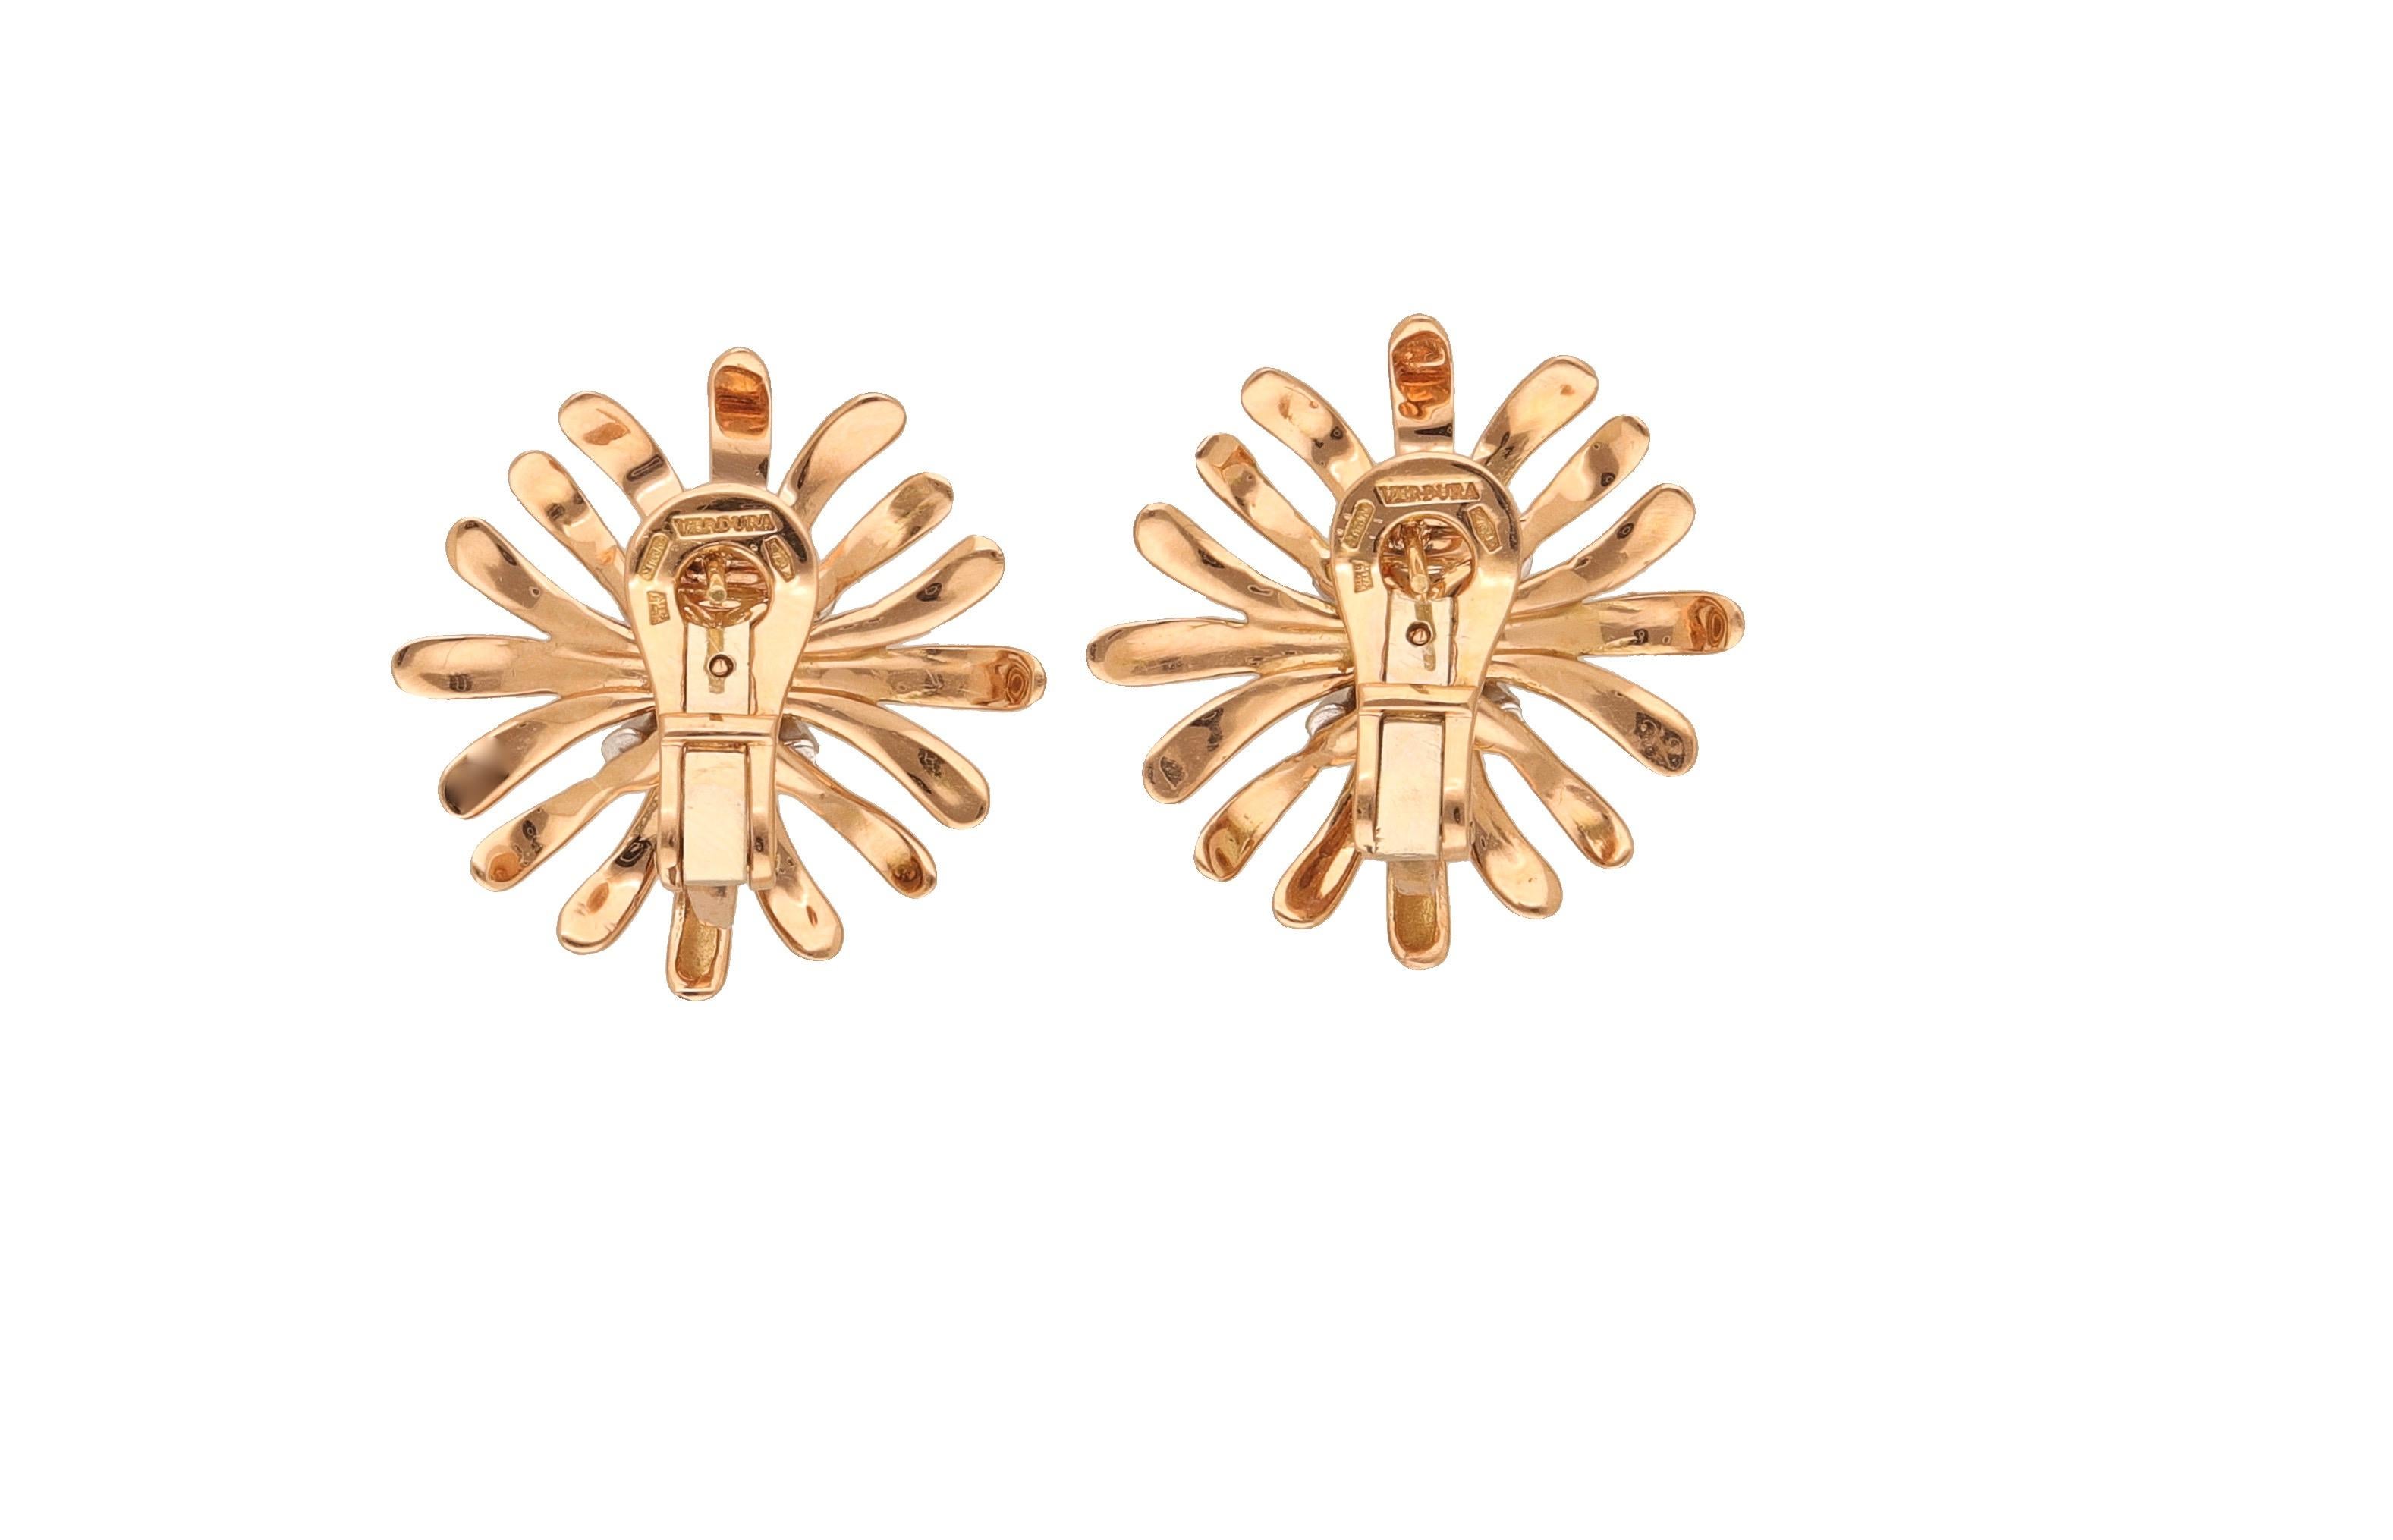 18 karat yellow and white gold clip-on earrings with round-cut diamonds signed by Verdura.
These classic pair of earrings can be worn every day.
Verdura is an Italian jewelry designer known for his original and eccentric style.

Weight: 17.00